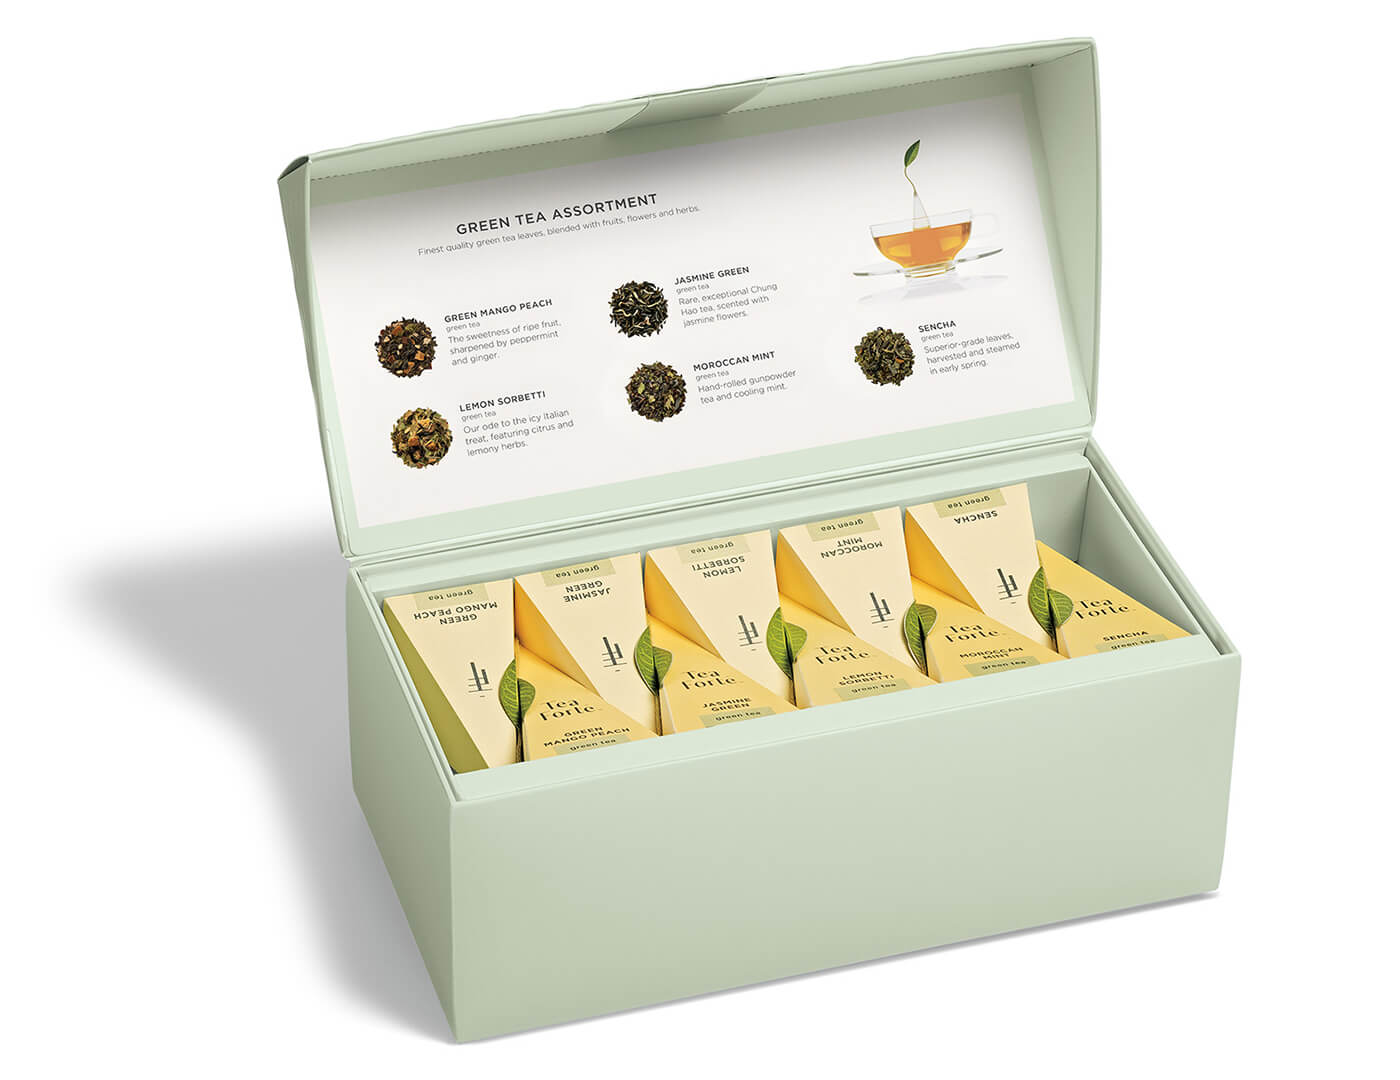 Green tea assortment in a 20 count presentation box with lid open